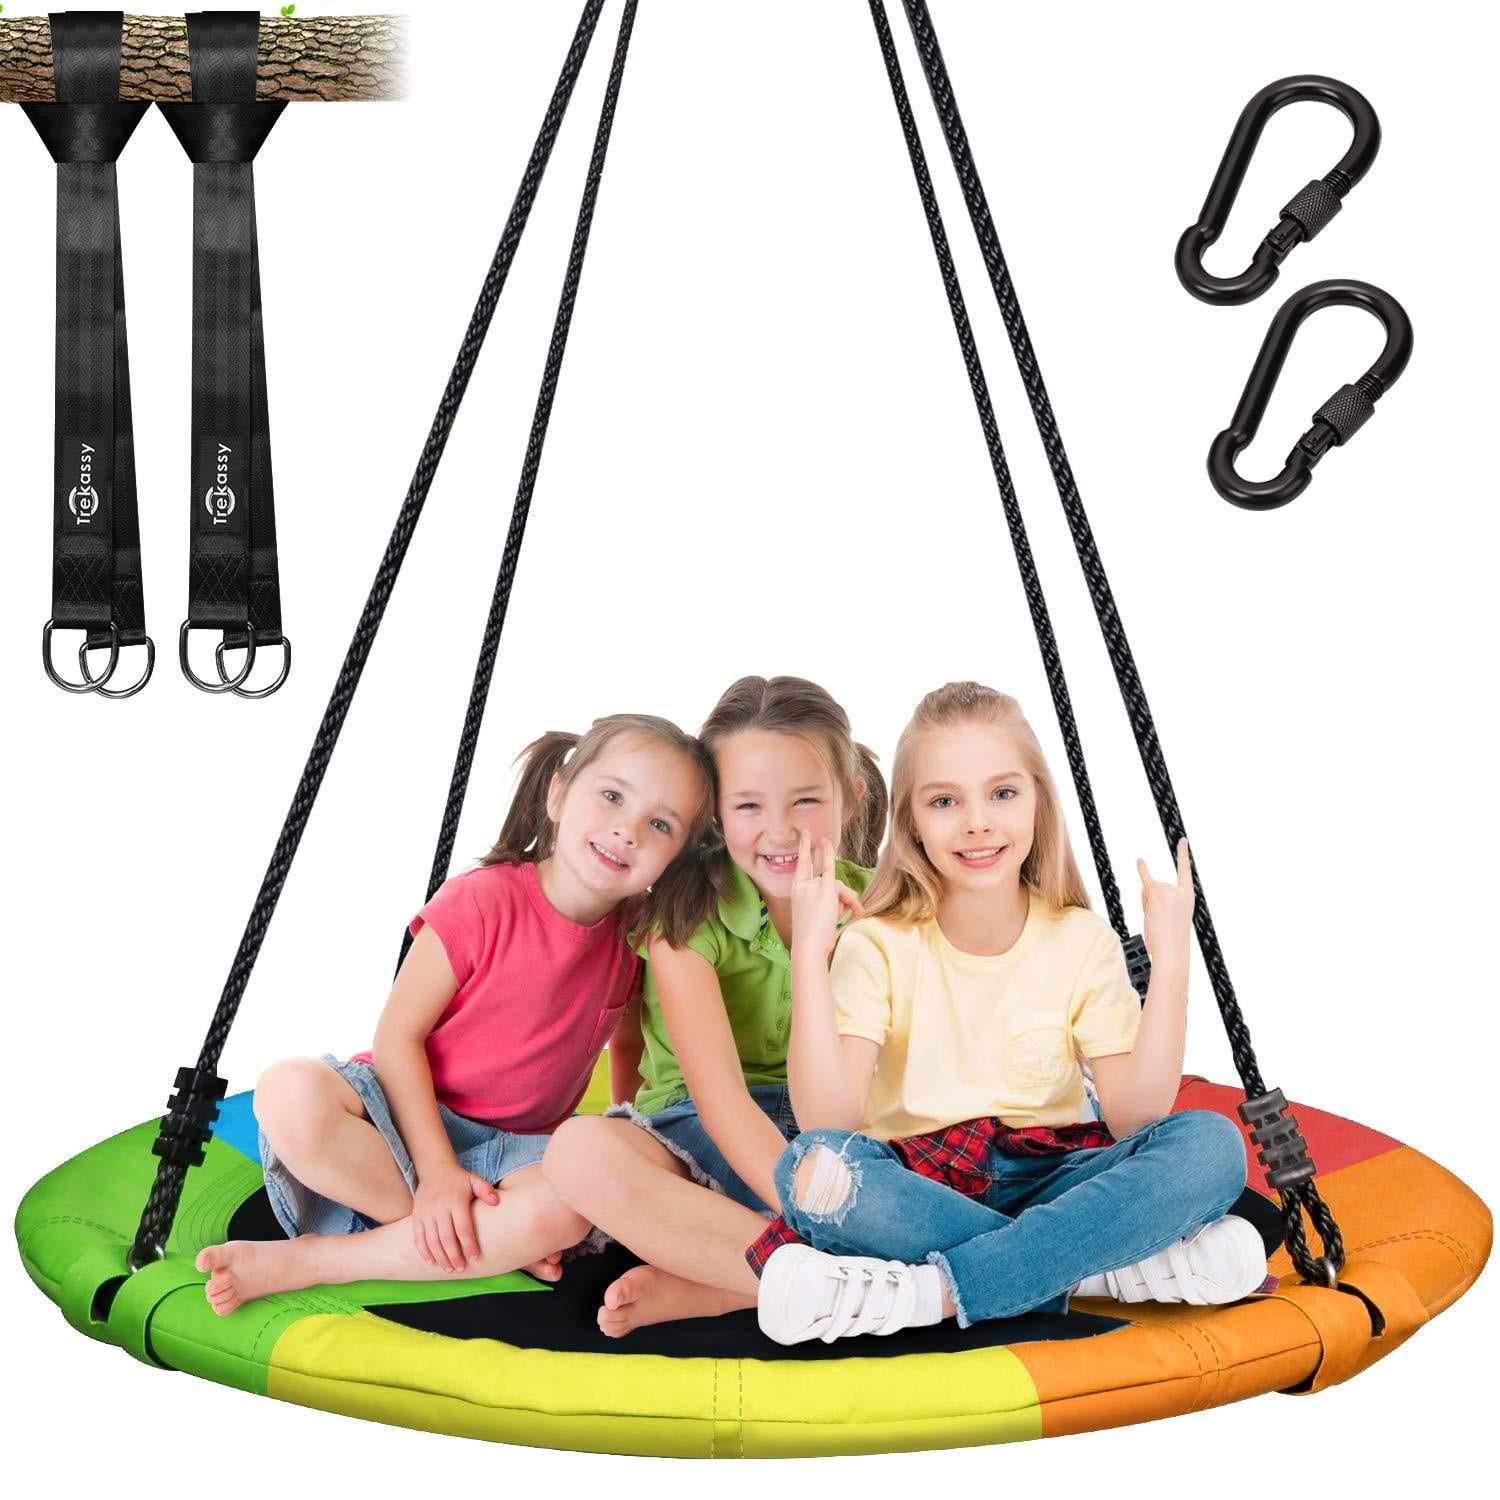 Steel Frame and Adjustable Ropes--Blue Trekassy 700lb 40 Inch Saucer Tree Swing for Kids Adults 900D Oxford Waterproof with Swivel 2pcs 10ft Tree Hanging Straps 